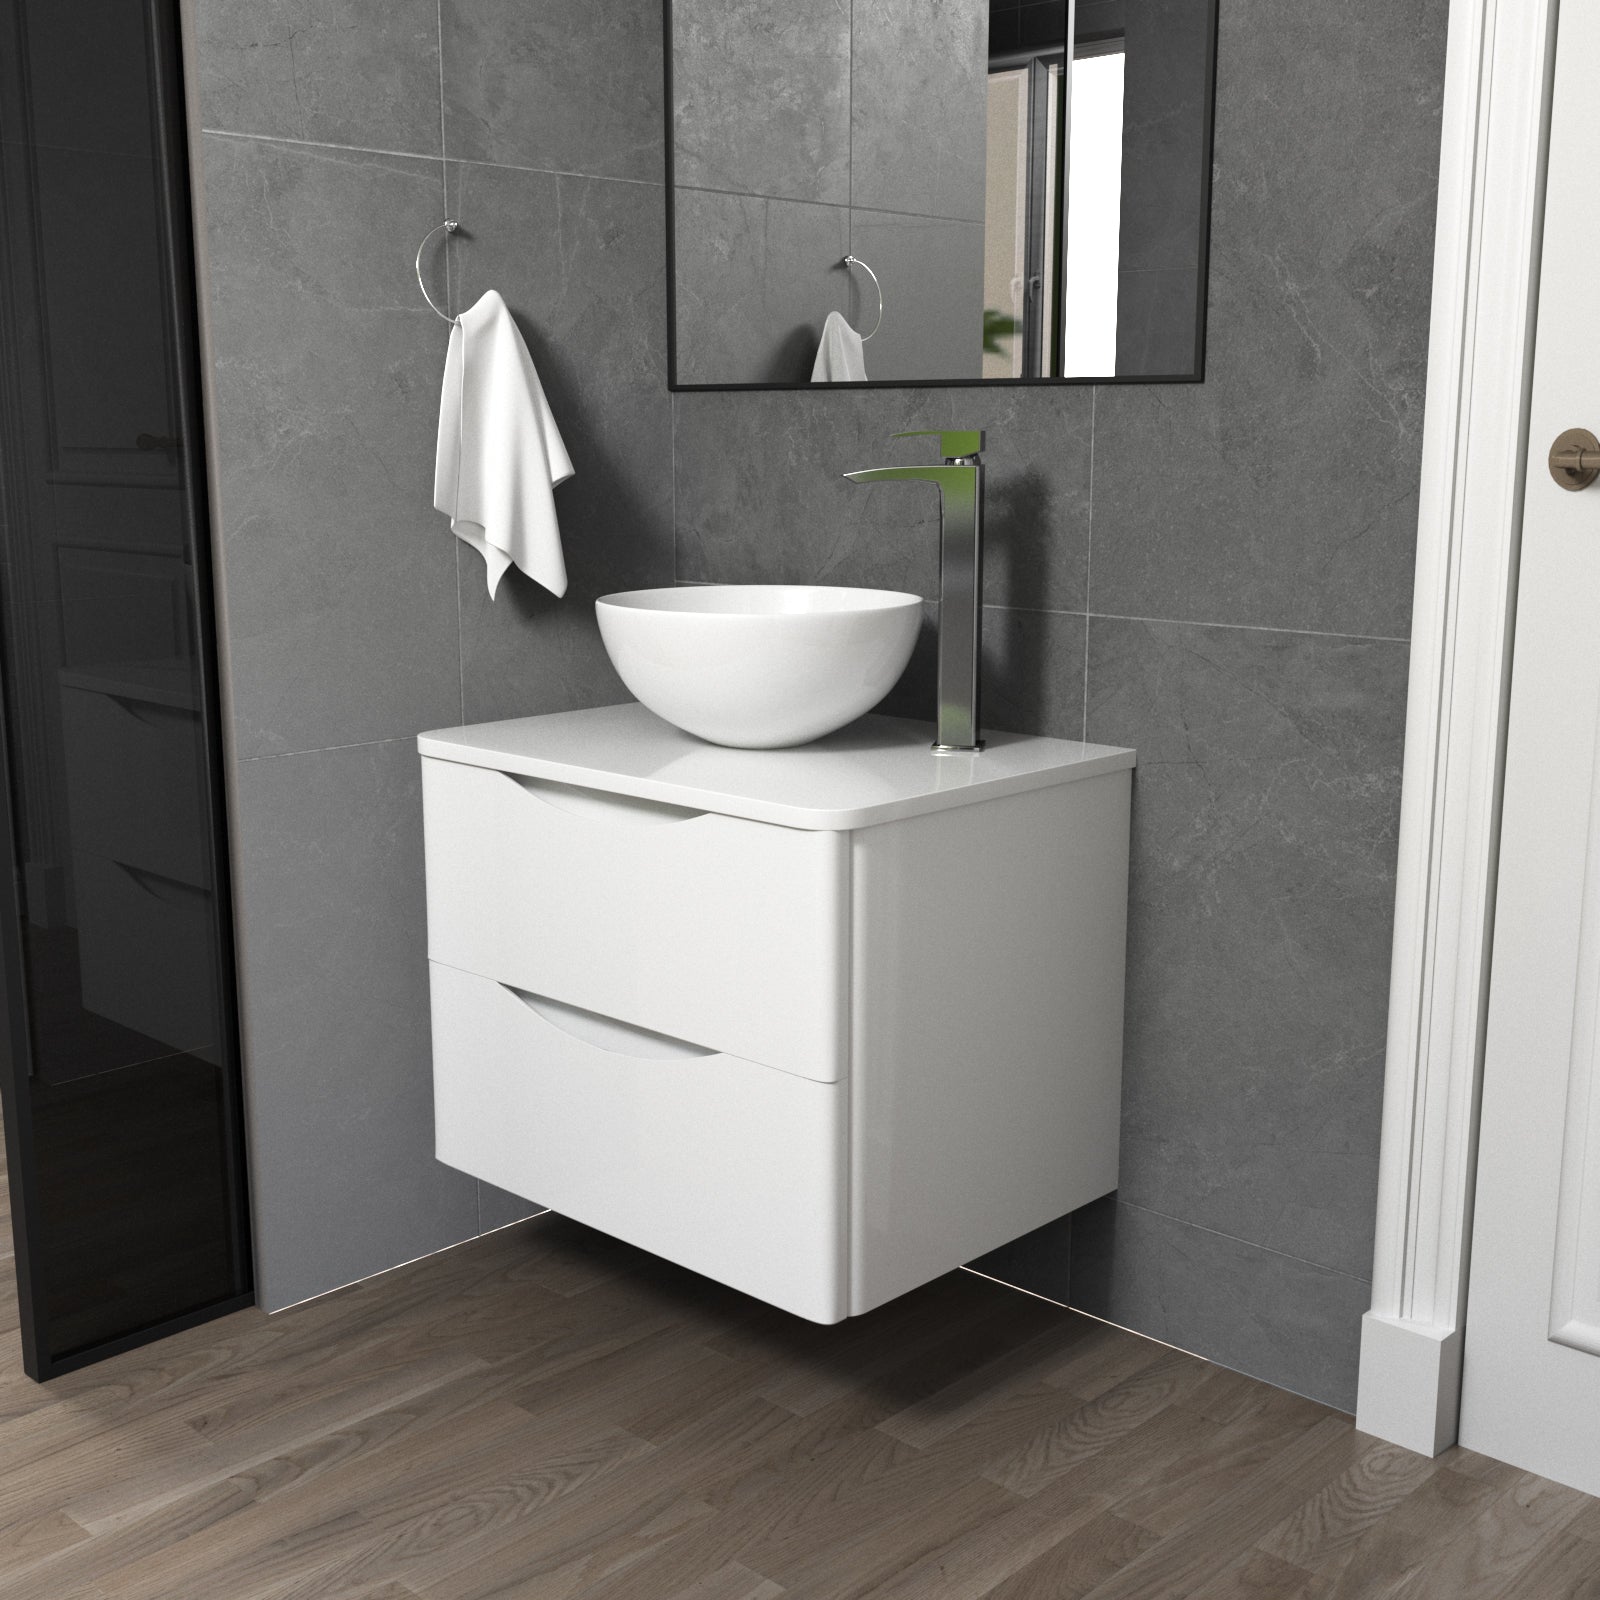 Merton White 600mm Bathroom Wall Hung Vanity Unit With Round Ceramic Countertop 320mm Basin